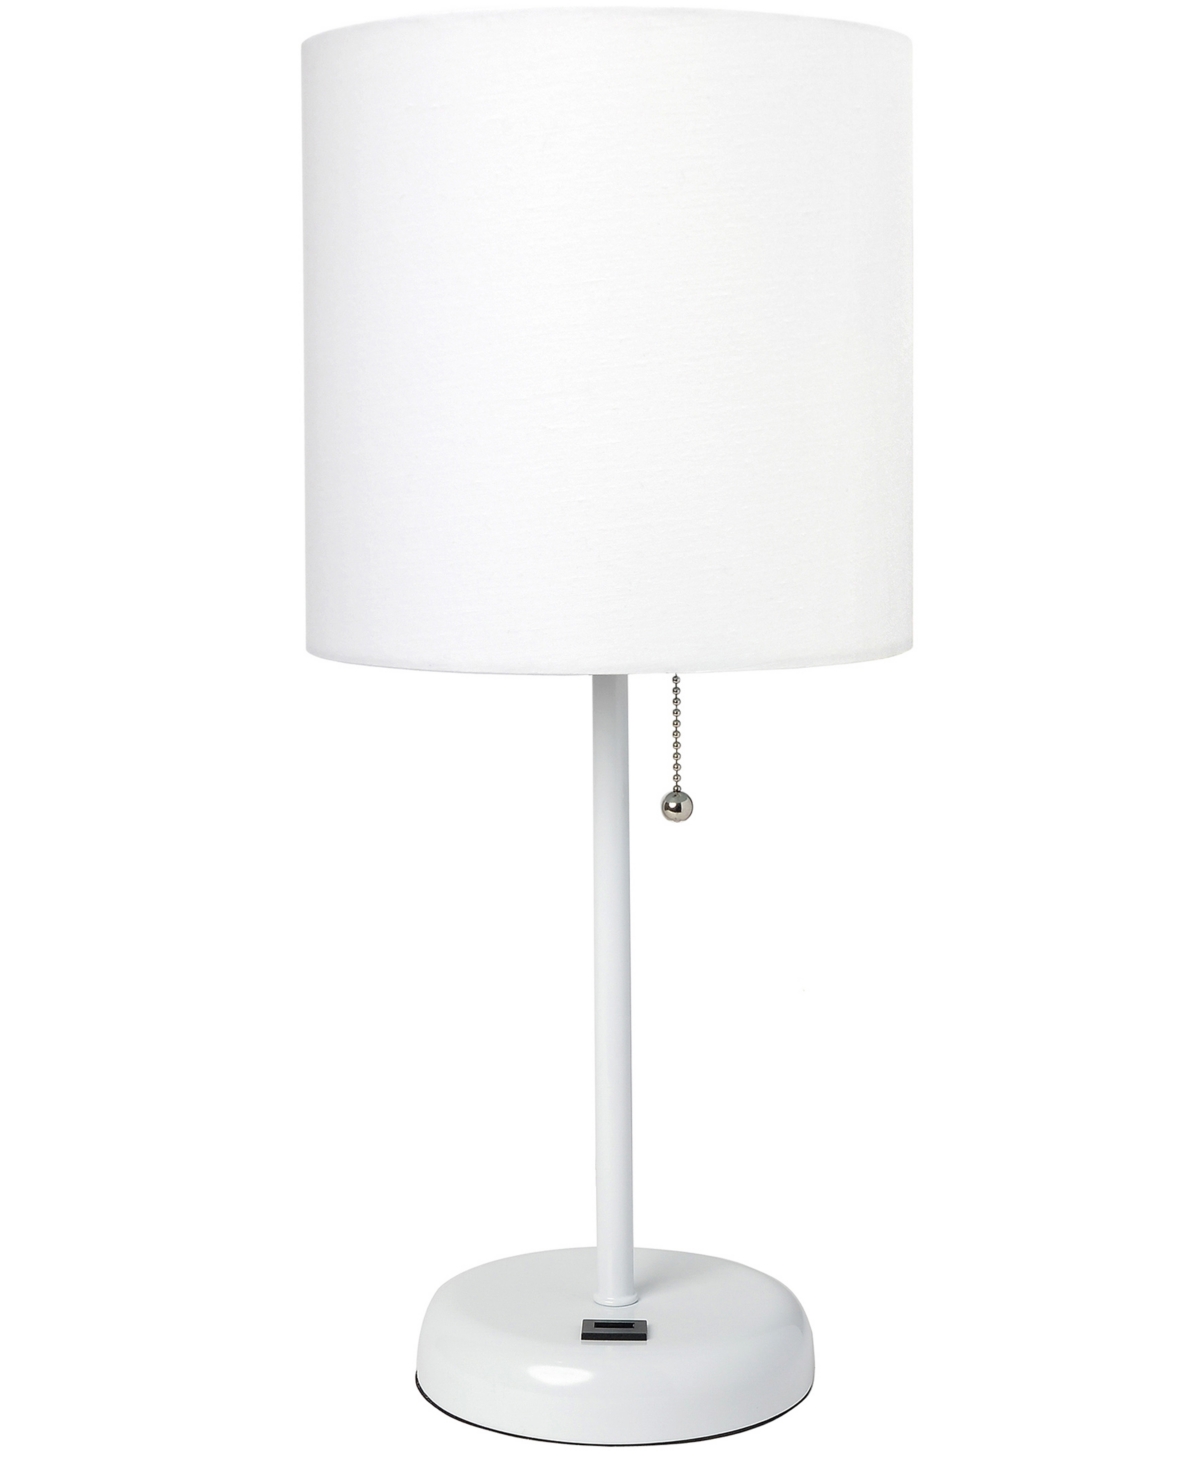 Shop Creekwood Home Oslo 19.5" Contemporary Bedside Usb Port Feature Standard Metal Table Desk Lamp In White,white Shade